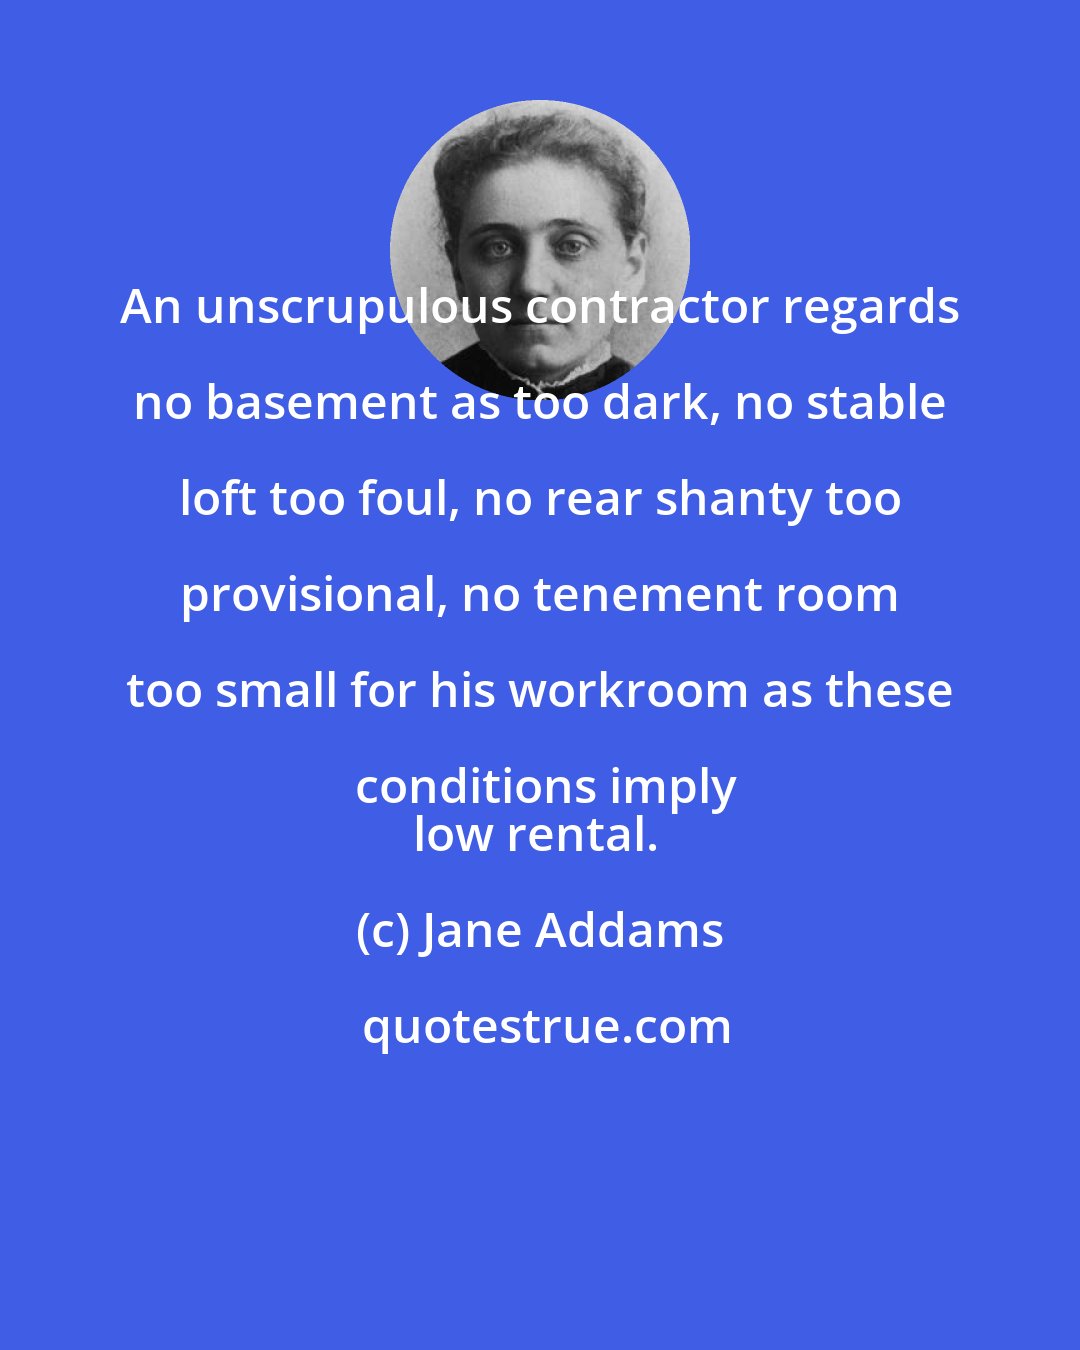 Jane Addams: An unscrupulous contractor regards no basement as too dark, no stable loft too foul, no rear shanty too provisional, no tenement room too small for his workroom as these conditions imply
low rental.